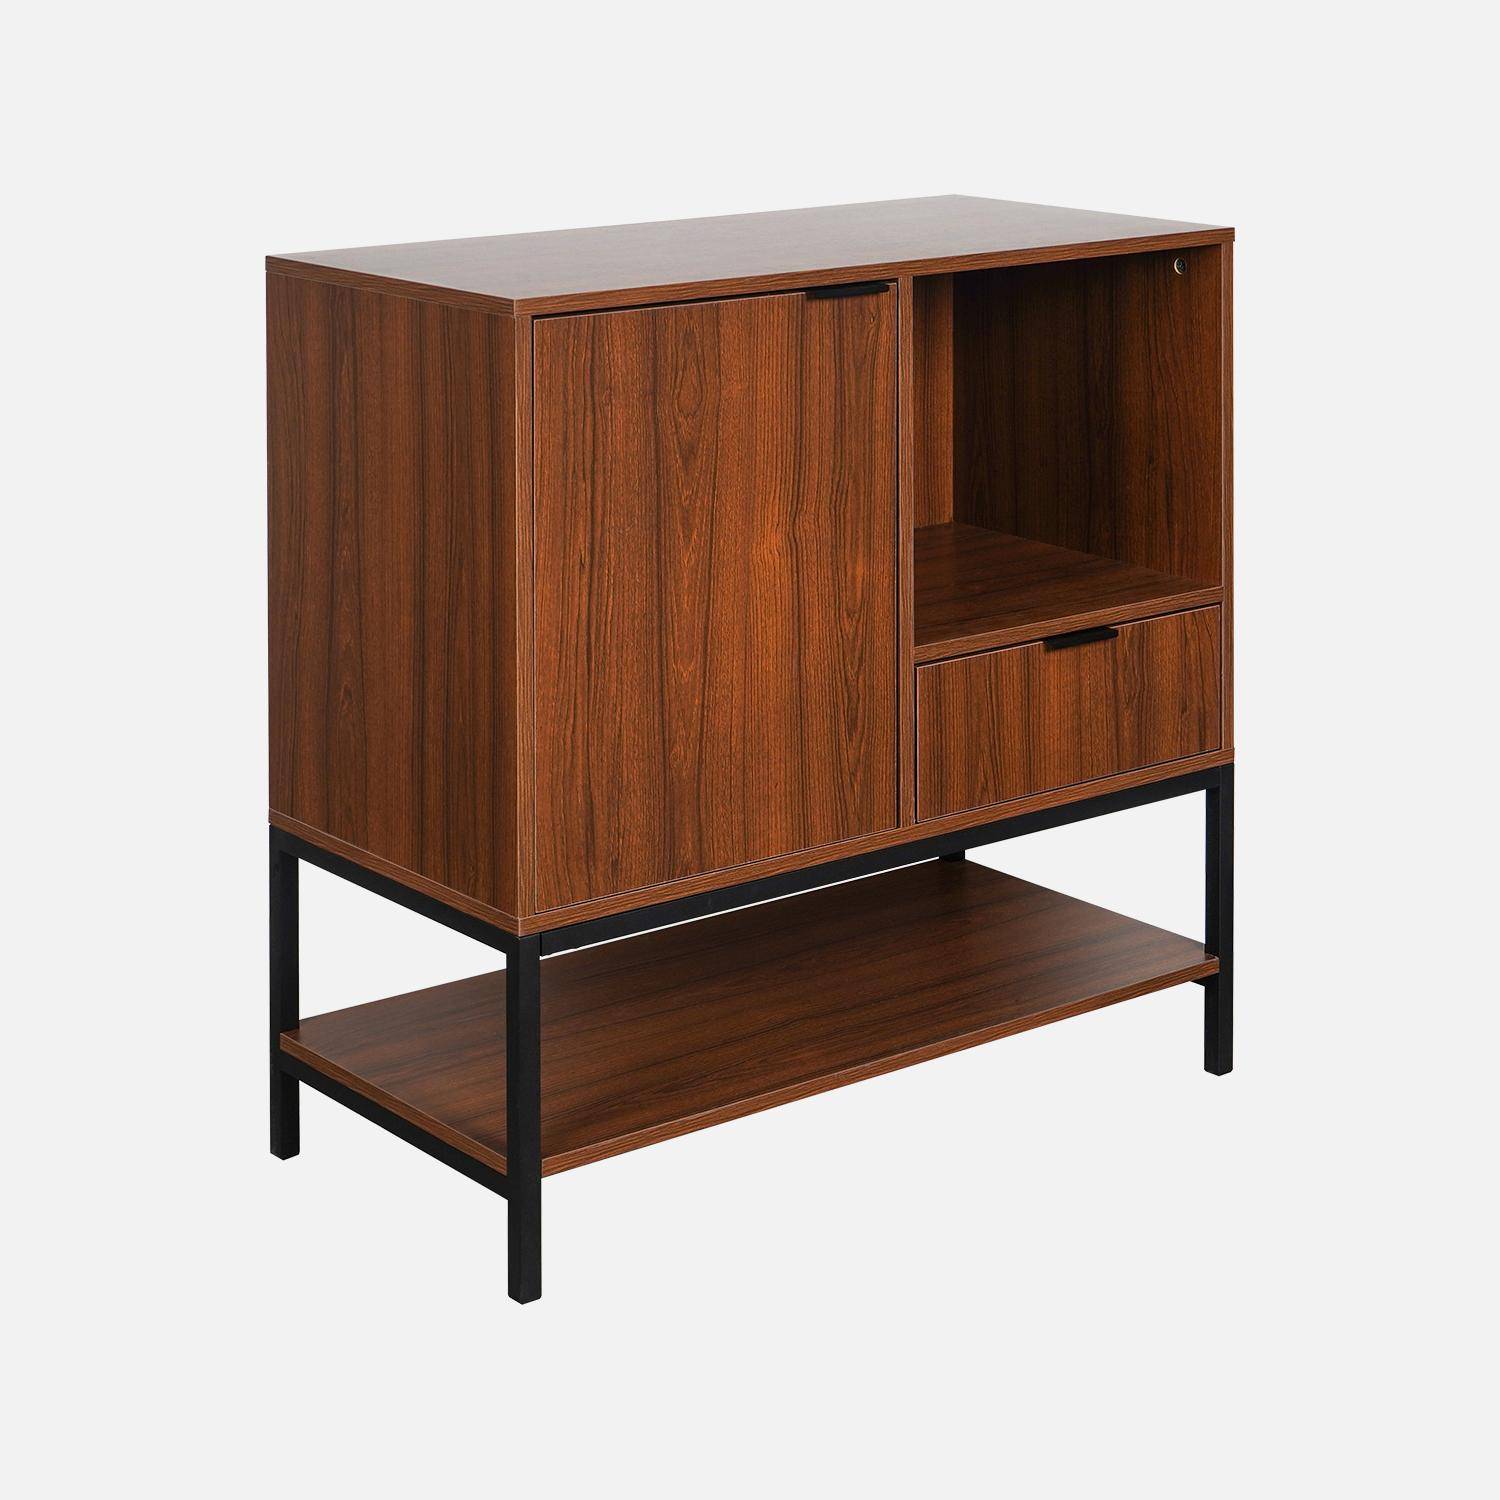 Low sideboard in walnut with black metal legs and handles - 1 door, 1 drawer and 2 shelves Photo3